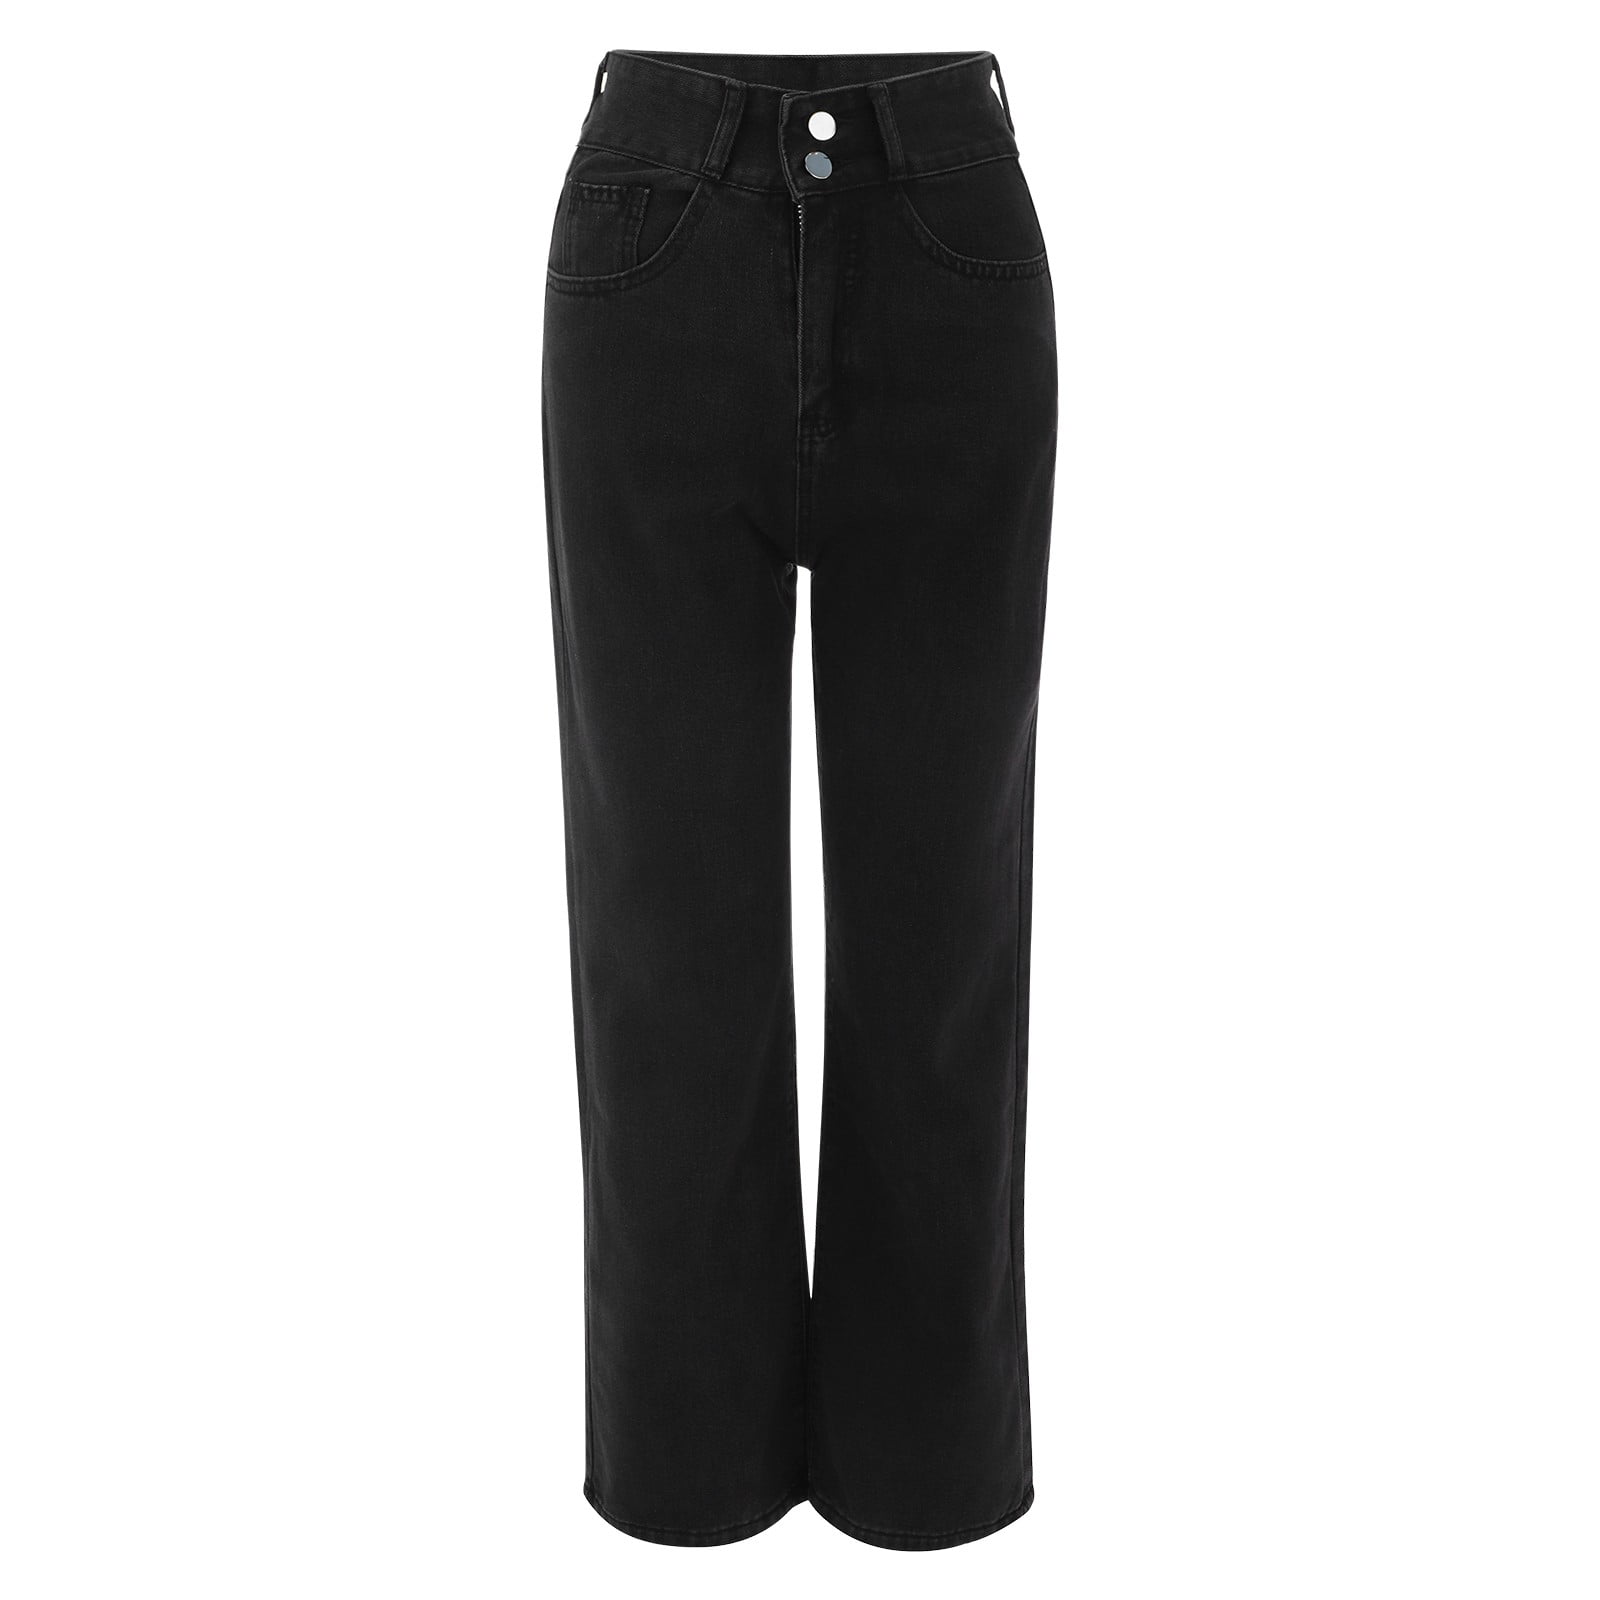 Quealent Super Straight Button Elastic Pocket Waist Jeans Trousers High ...